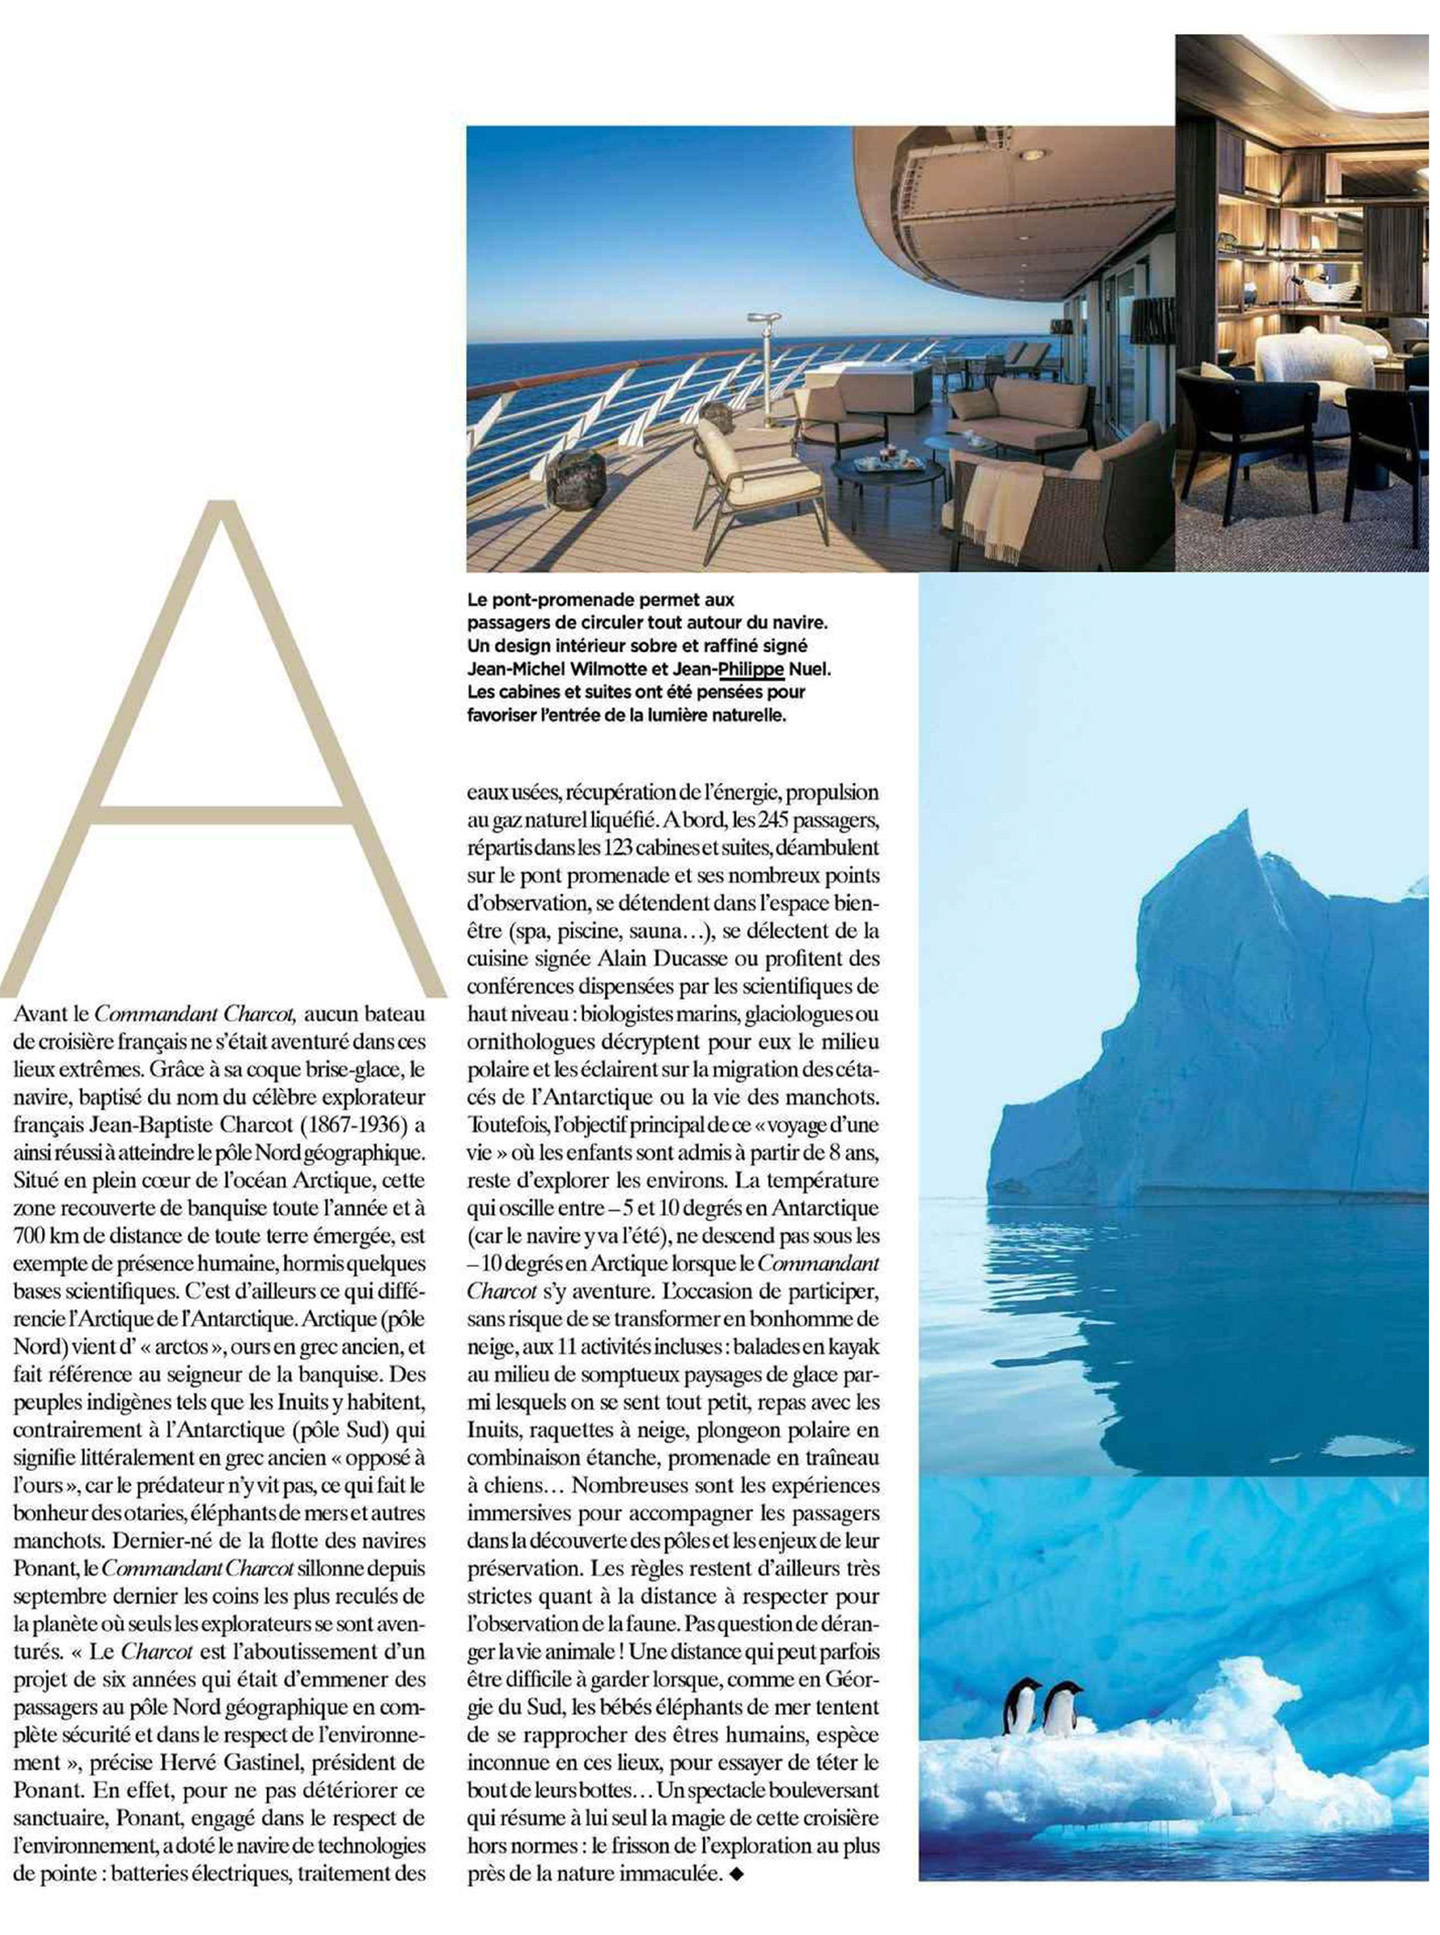 article on the commander charcot designed by jean-philippe nuel's interior design studio in gala magazine, luxury cruise ship, ponant